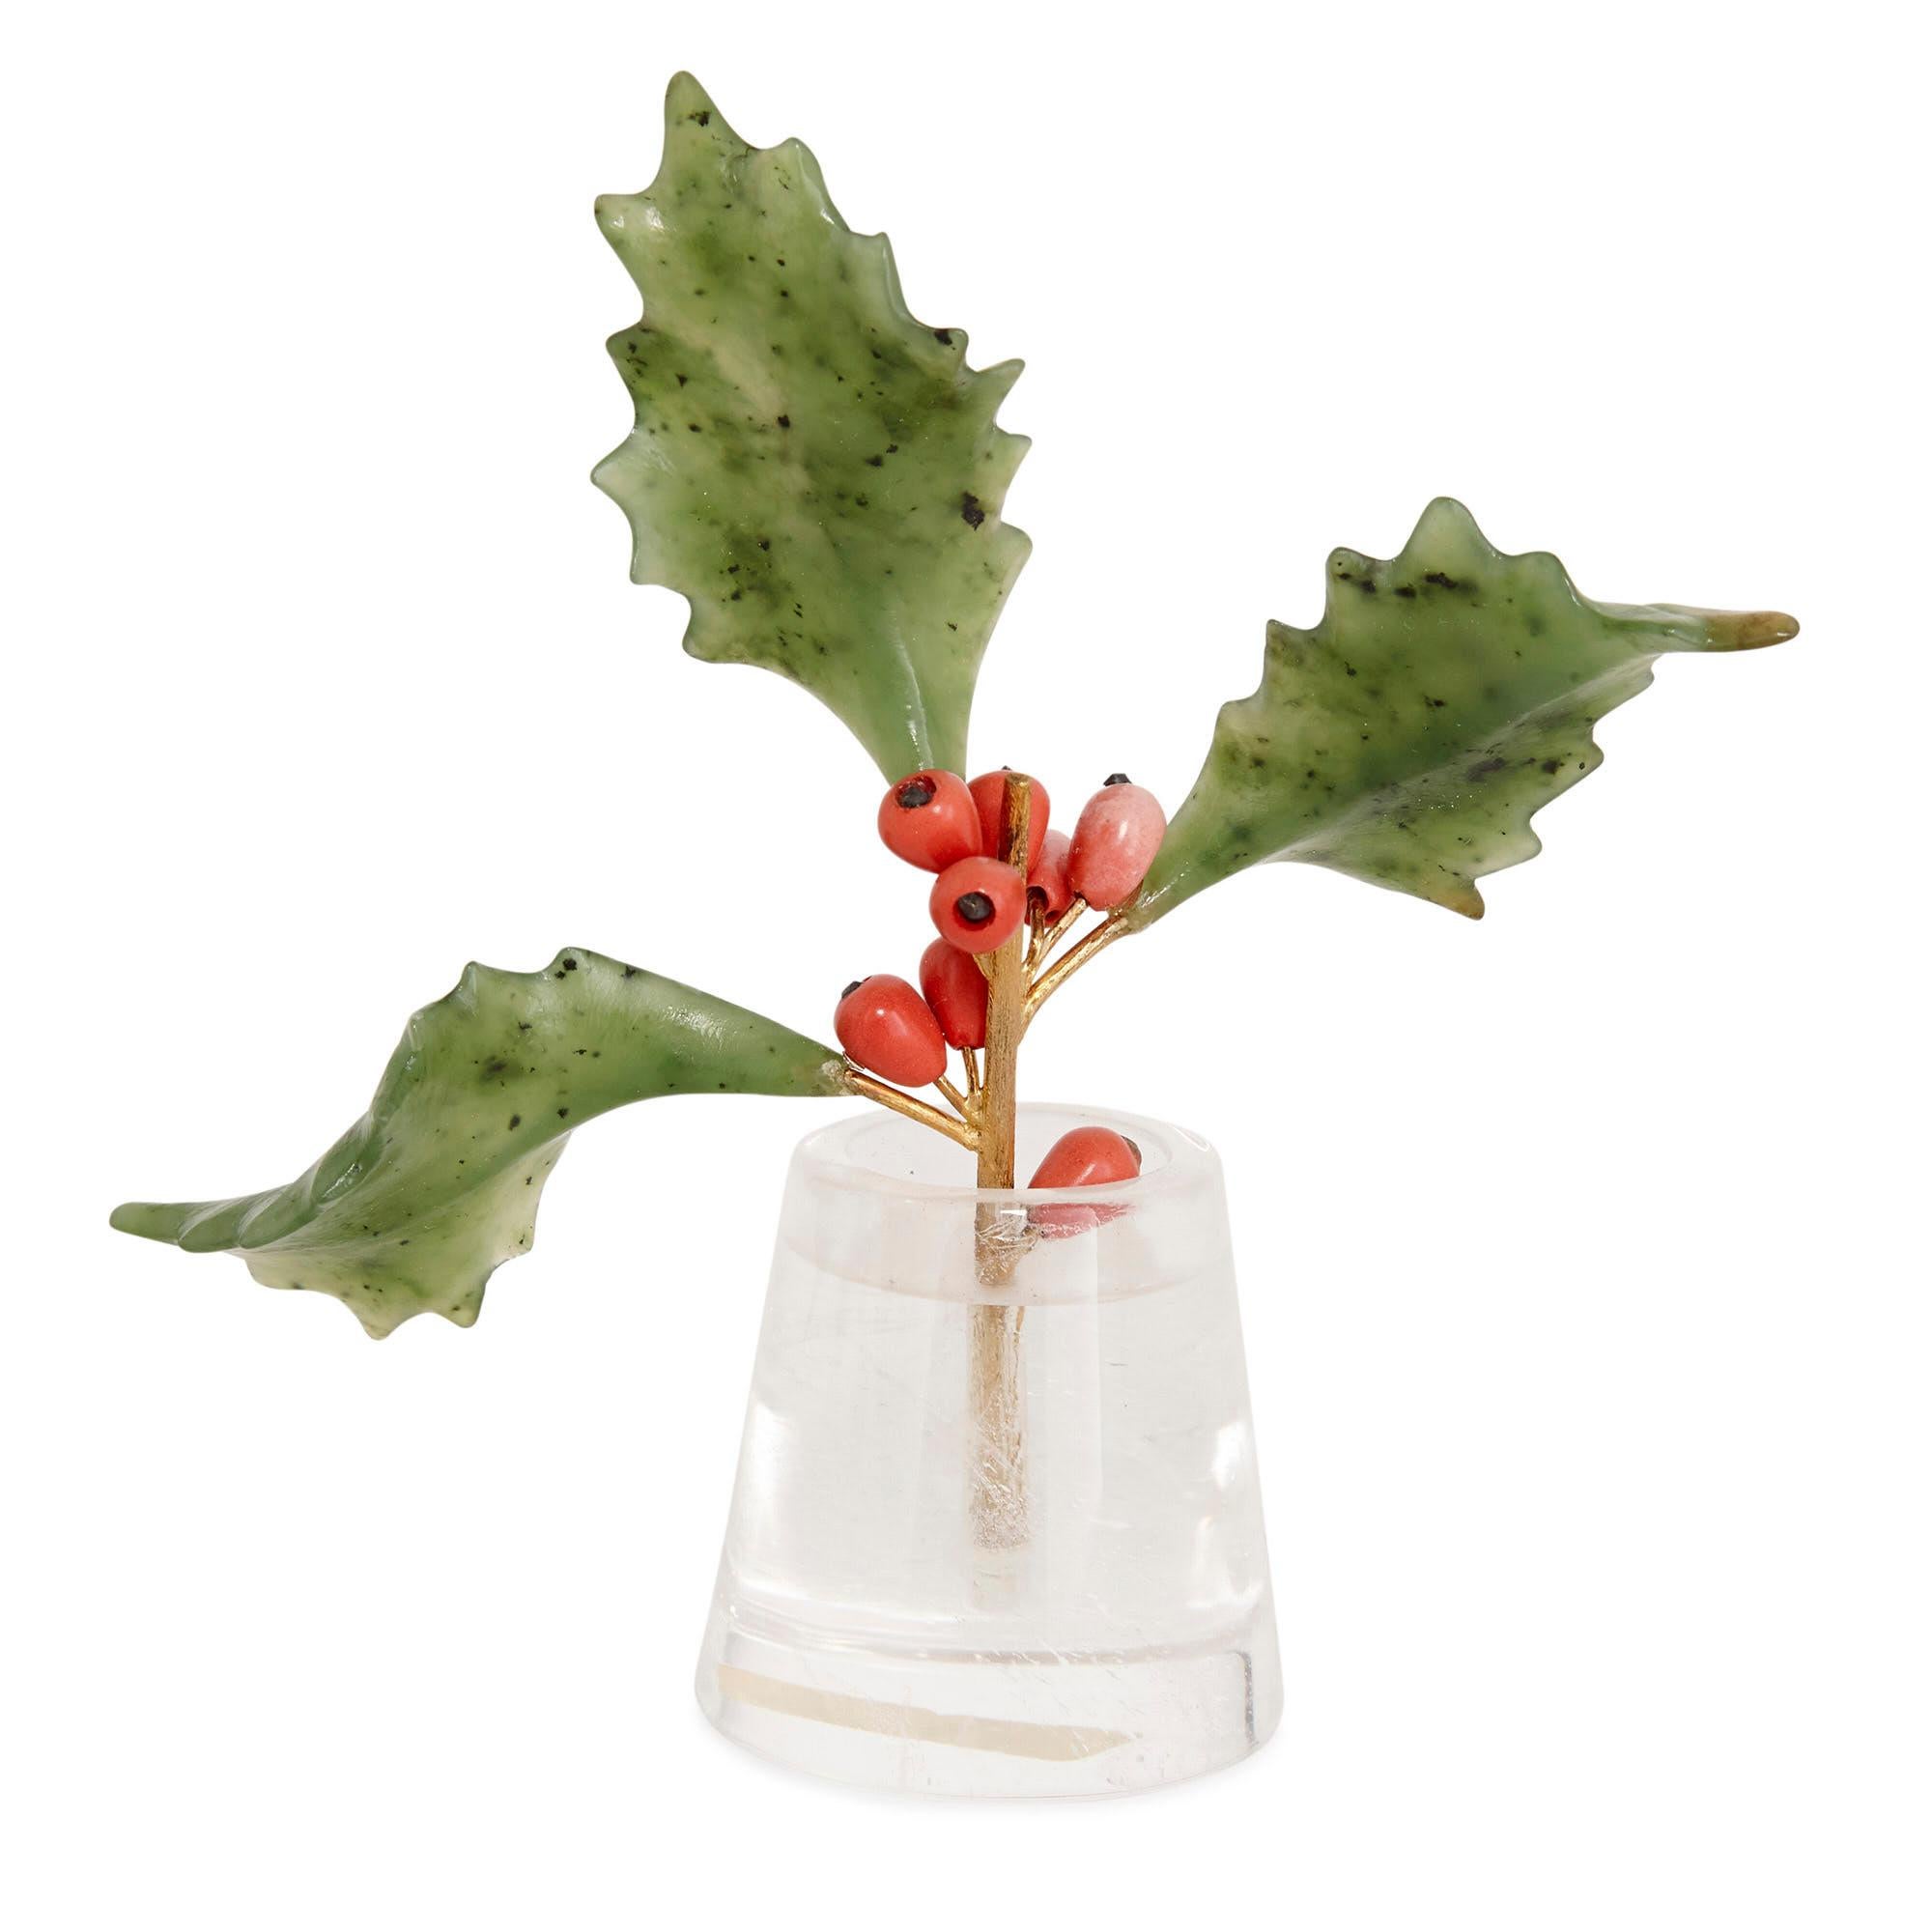 This model of a spray of holly is designed about the artistic conceit of the trompe l’oeil, or that which fools the eye. The stem of the spray rests in a rock crystal vase, the idea of which is to imitate a glass container filled with transparent